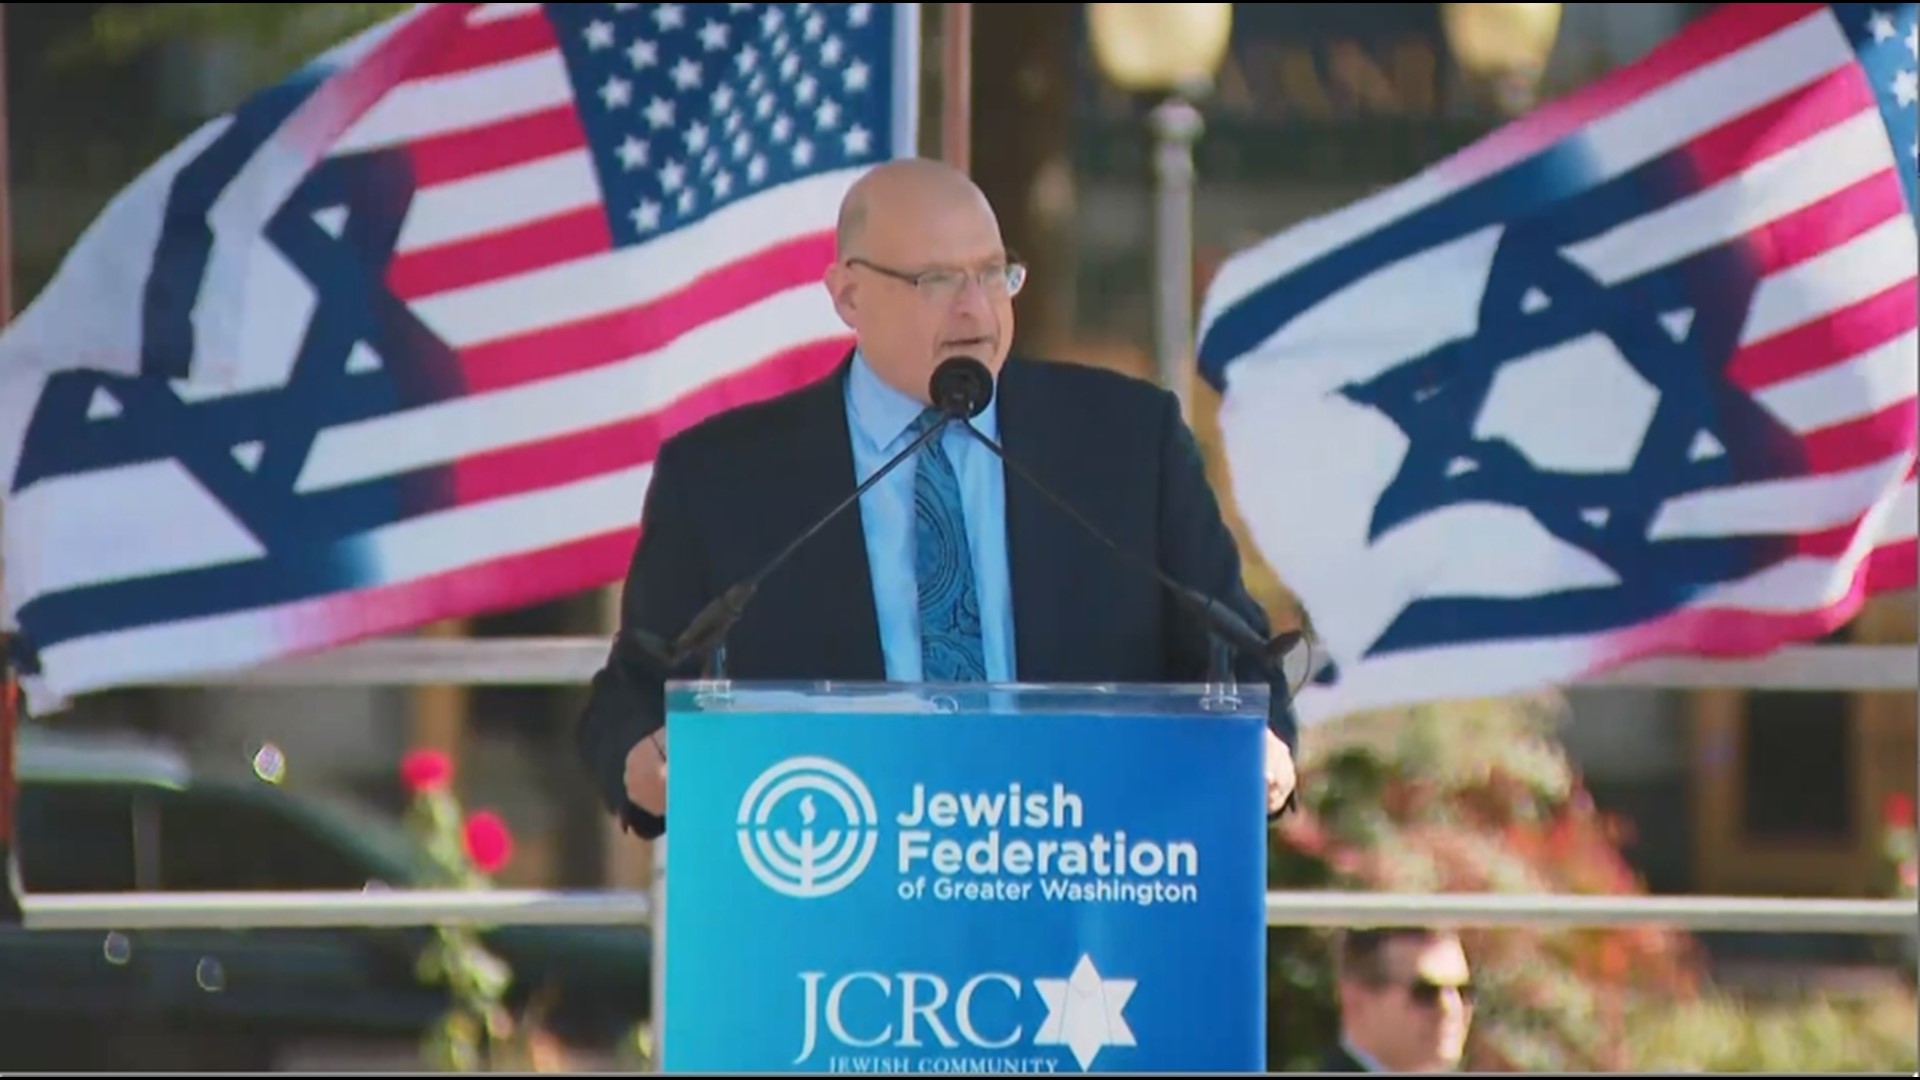 A rally in support of Israel is taking place Friday at Freedom Plaza in Washington, D.C. Among the guests for the rally are Mayor Muriel Bowser and Maryland Gov. Wes